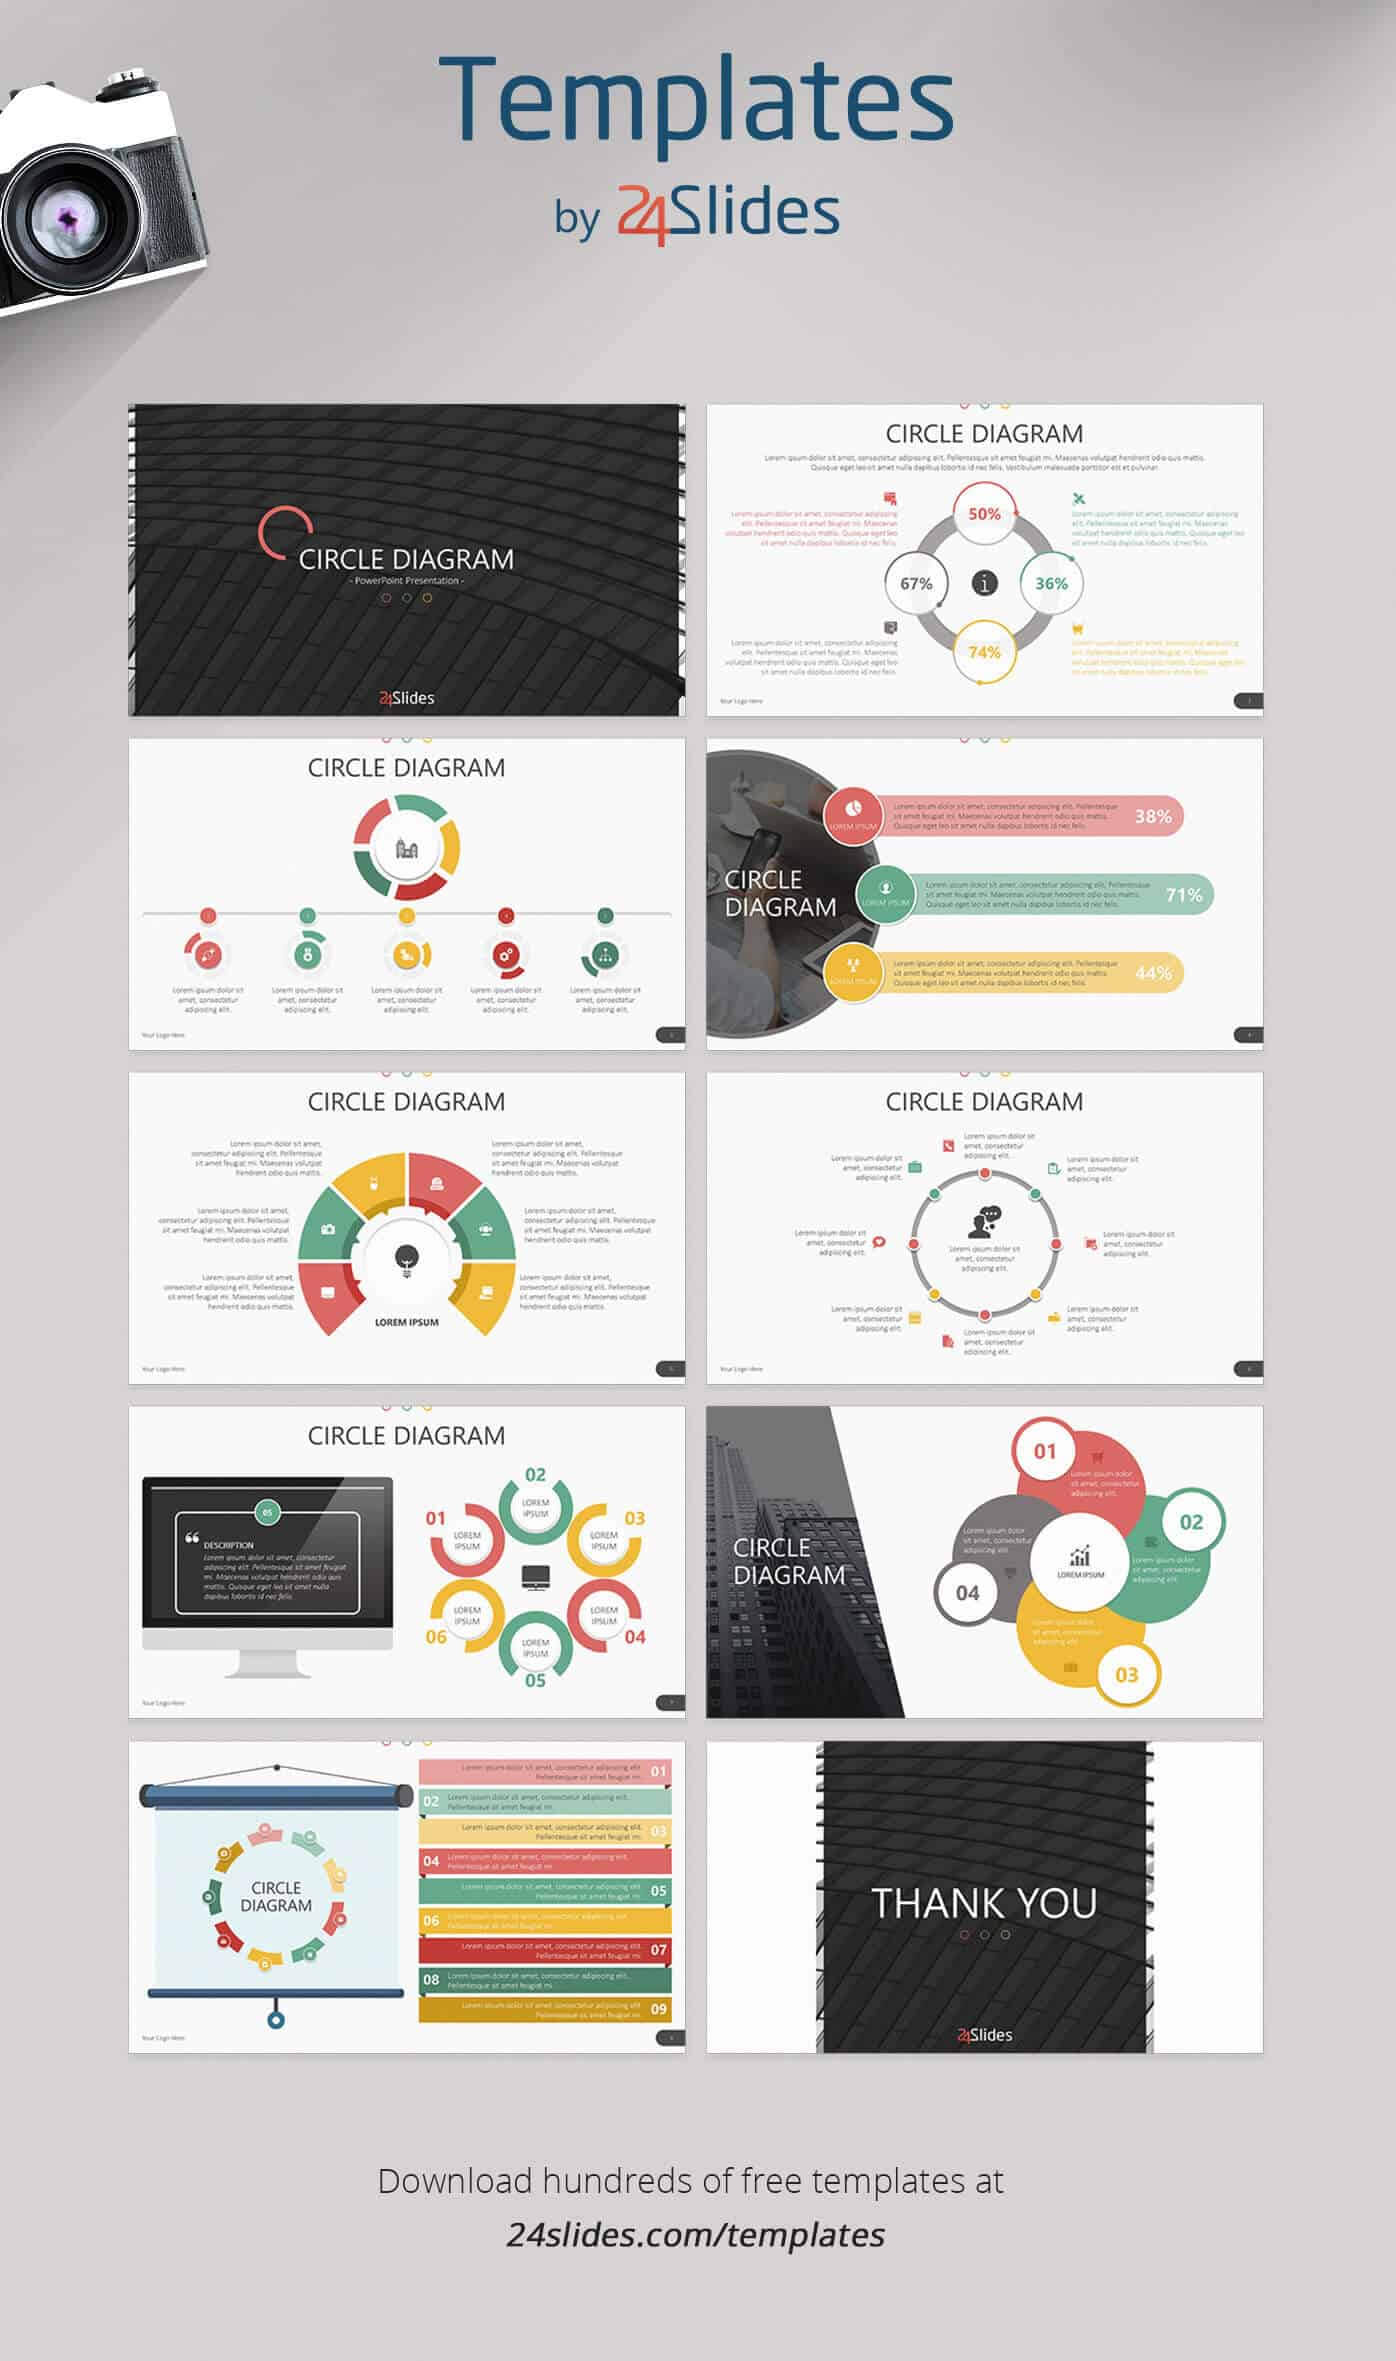 15 Fun And Colorful Free Powerpoint Templates | Present Better Throughout Powerpoint Photo Slideshow Template